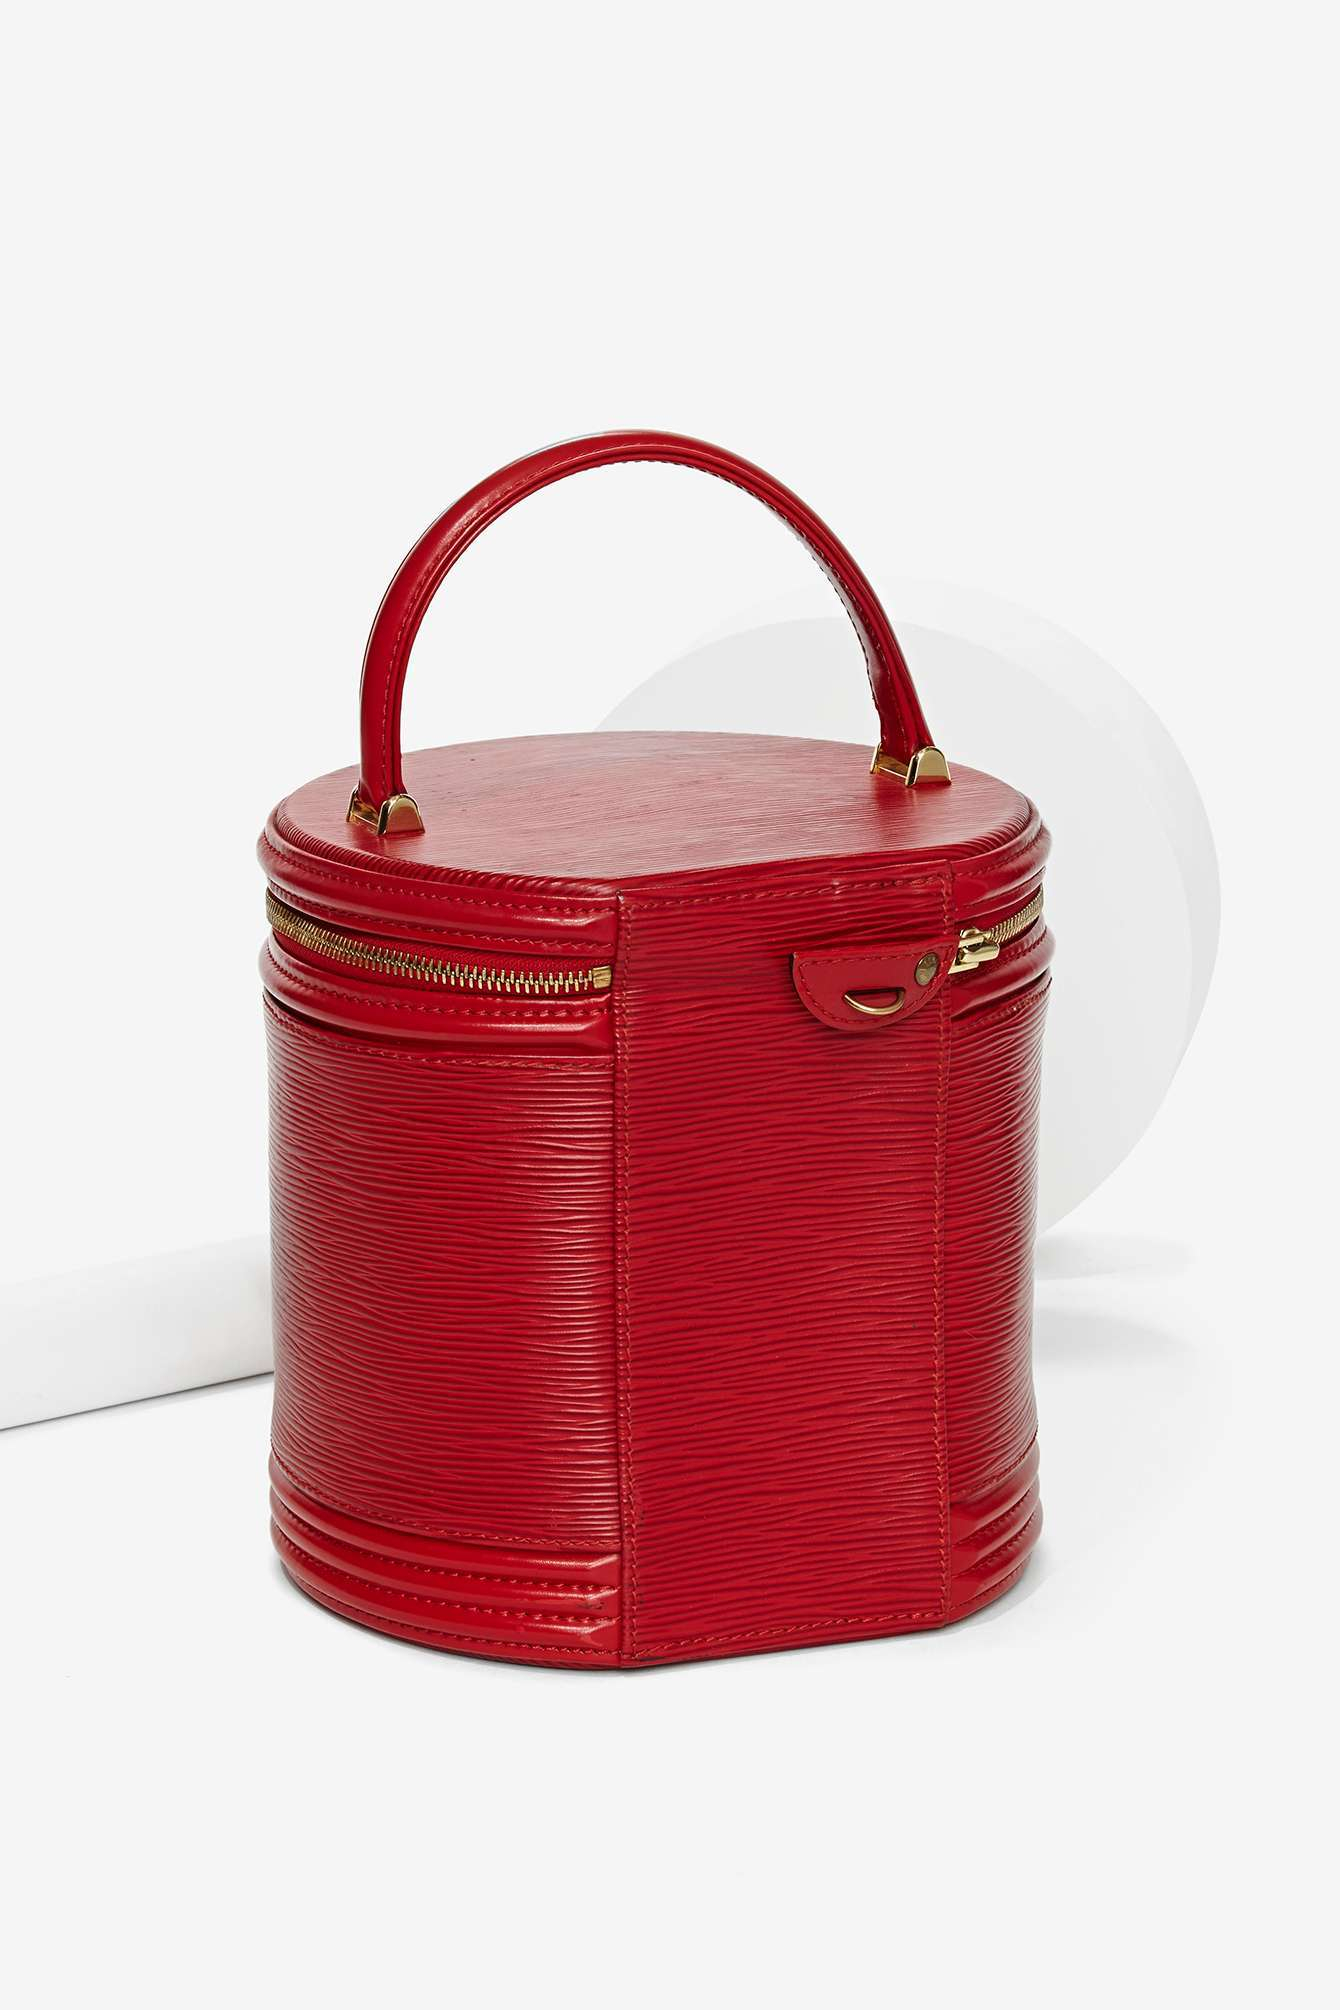 Nasty gal Vintage Louis Vuitton Cannes Leather Vanity Case in Red | Lyst